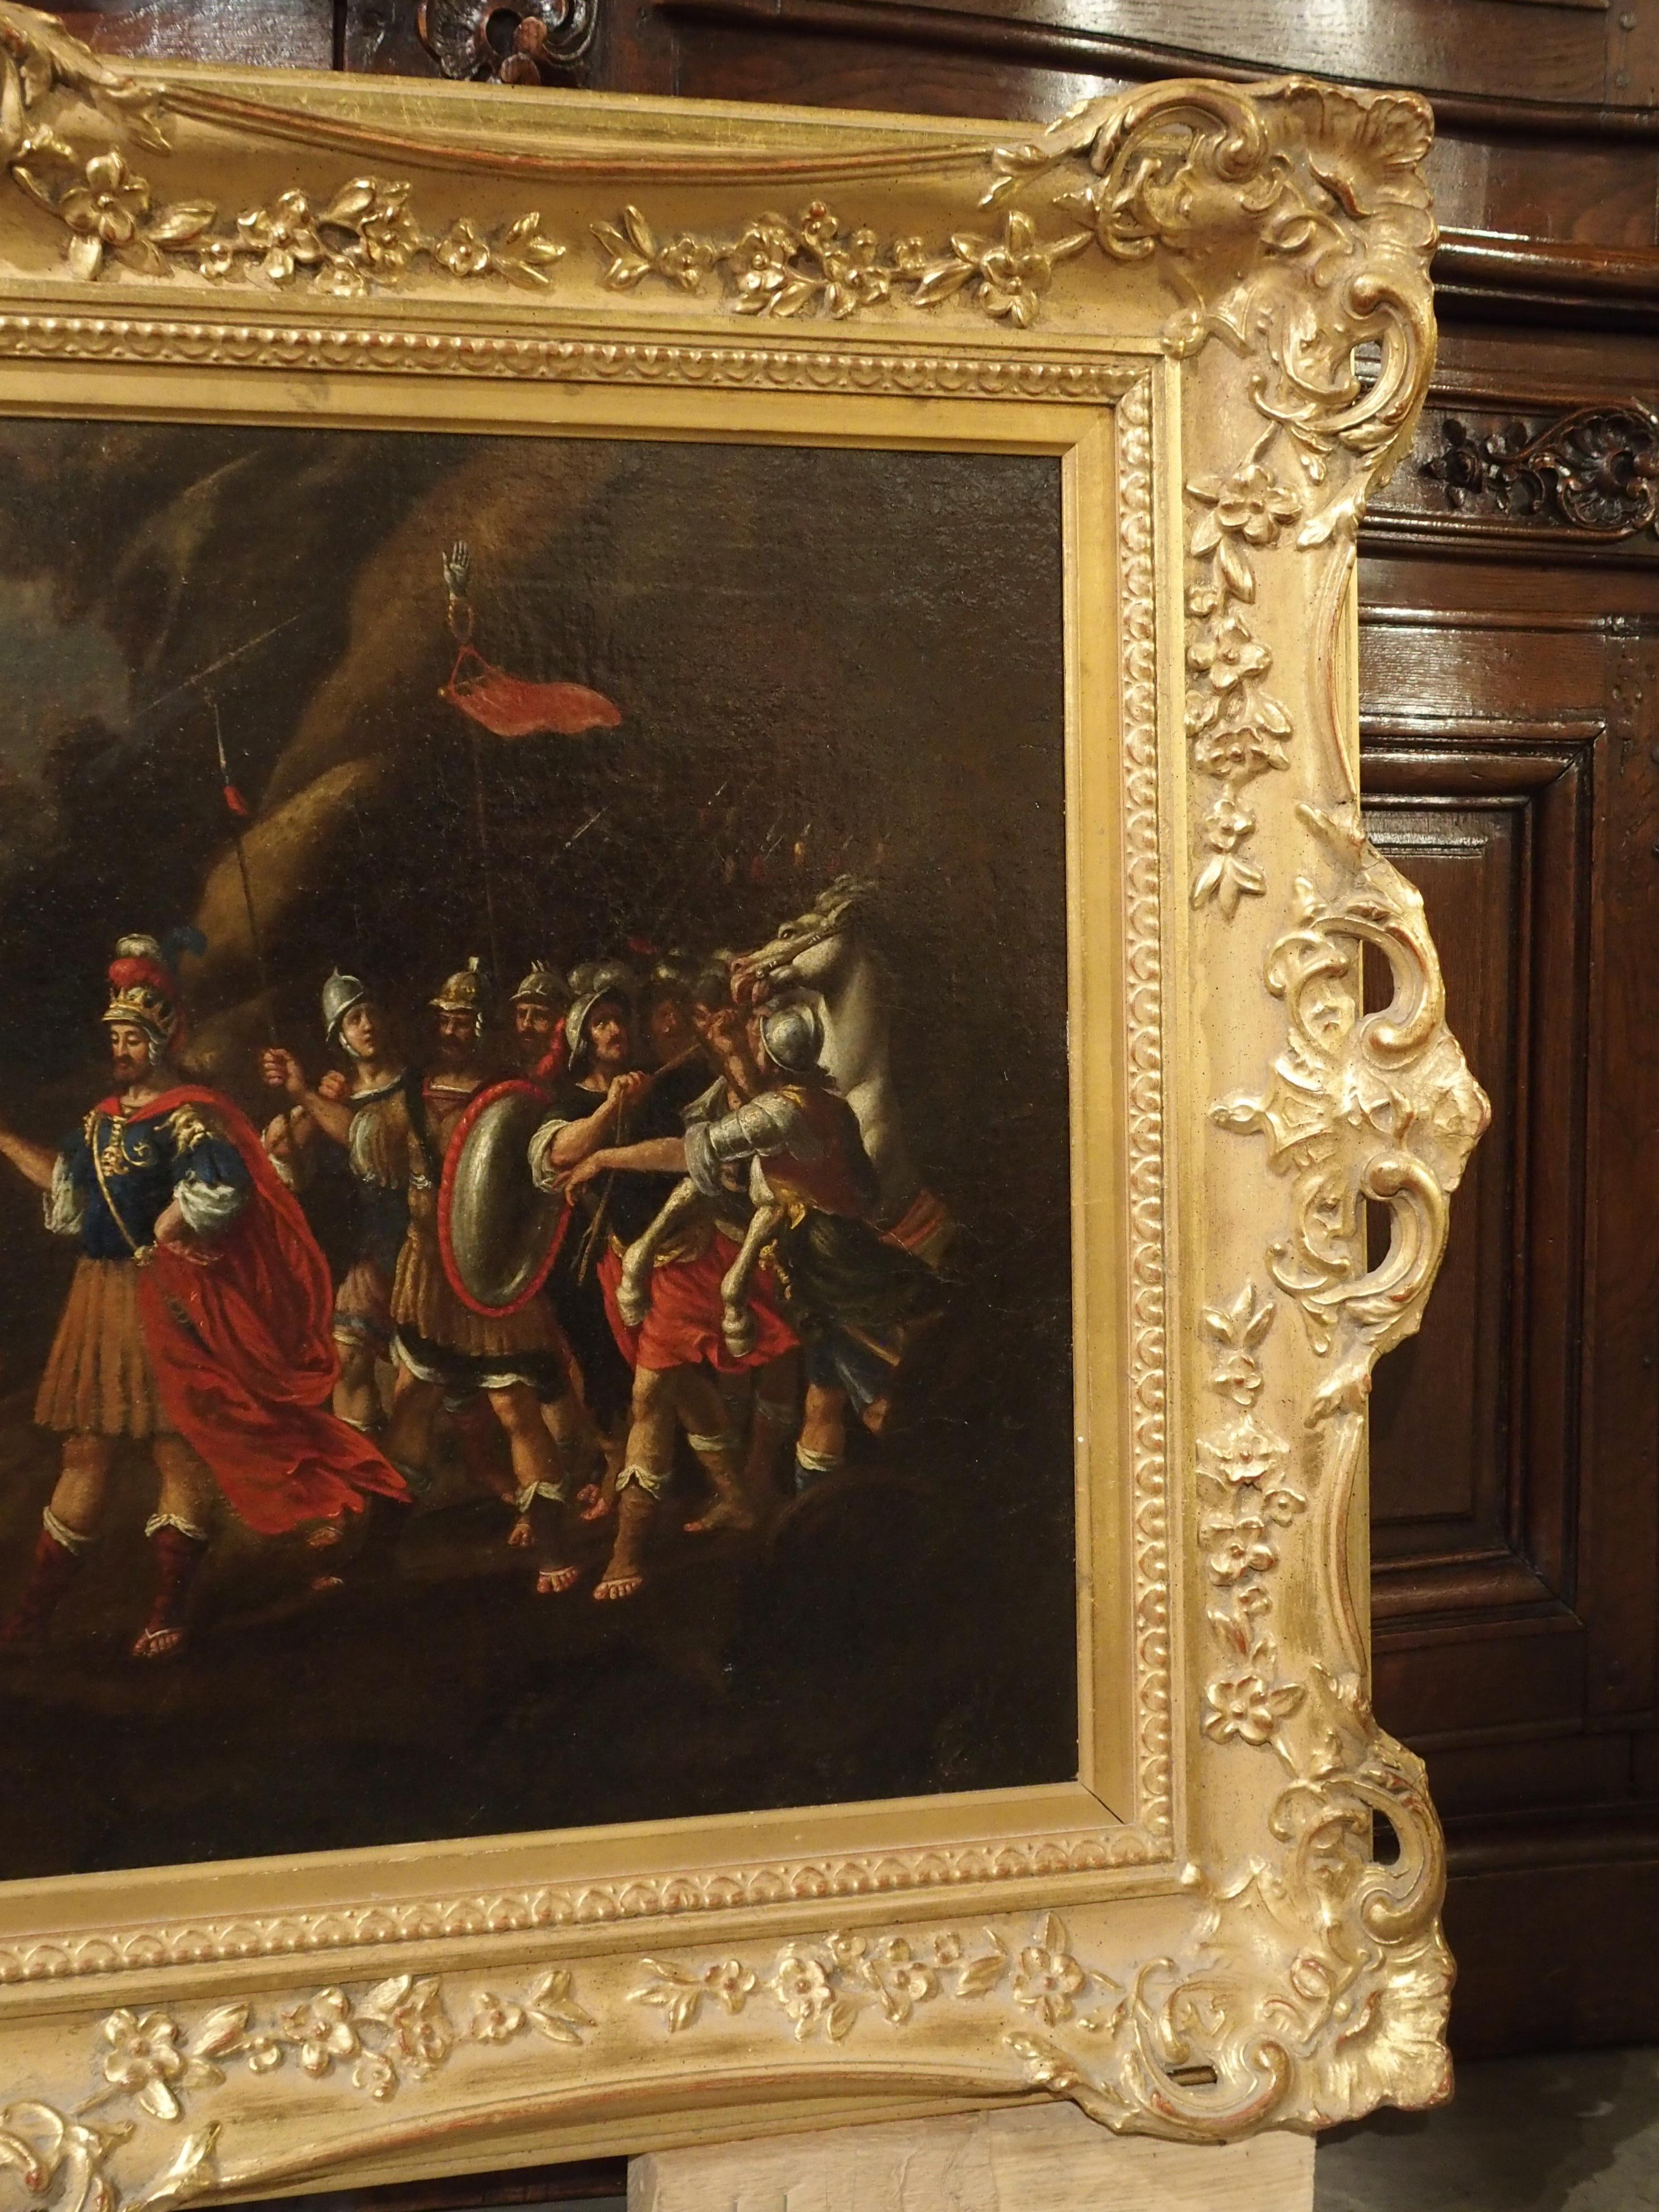 The rectangular oil painting measures nearly 4 1/2 long at the edges of the frame. It is of the Italian school during the 1700s, though the beautiful giltwood frame is 20th century. The scene is a depiction of a brightly dressed European army